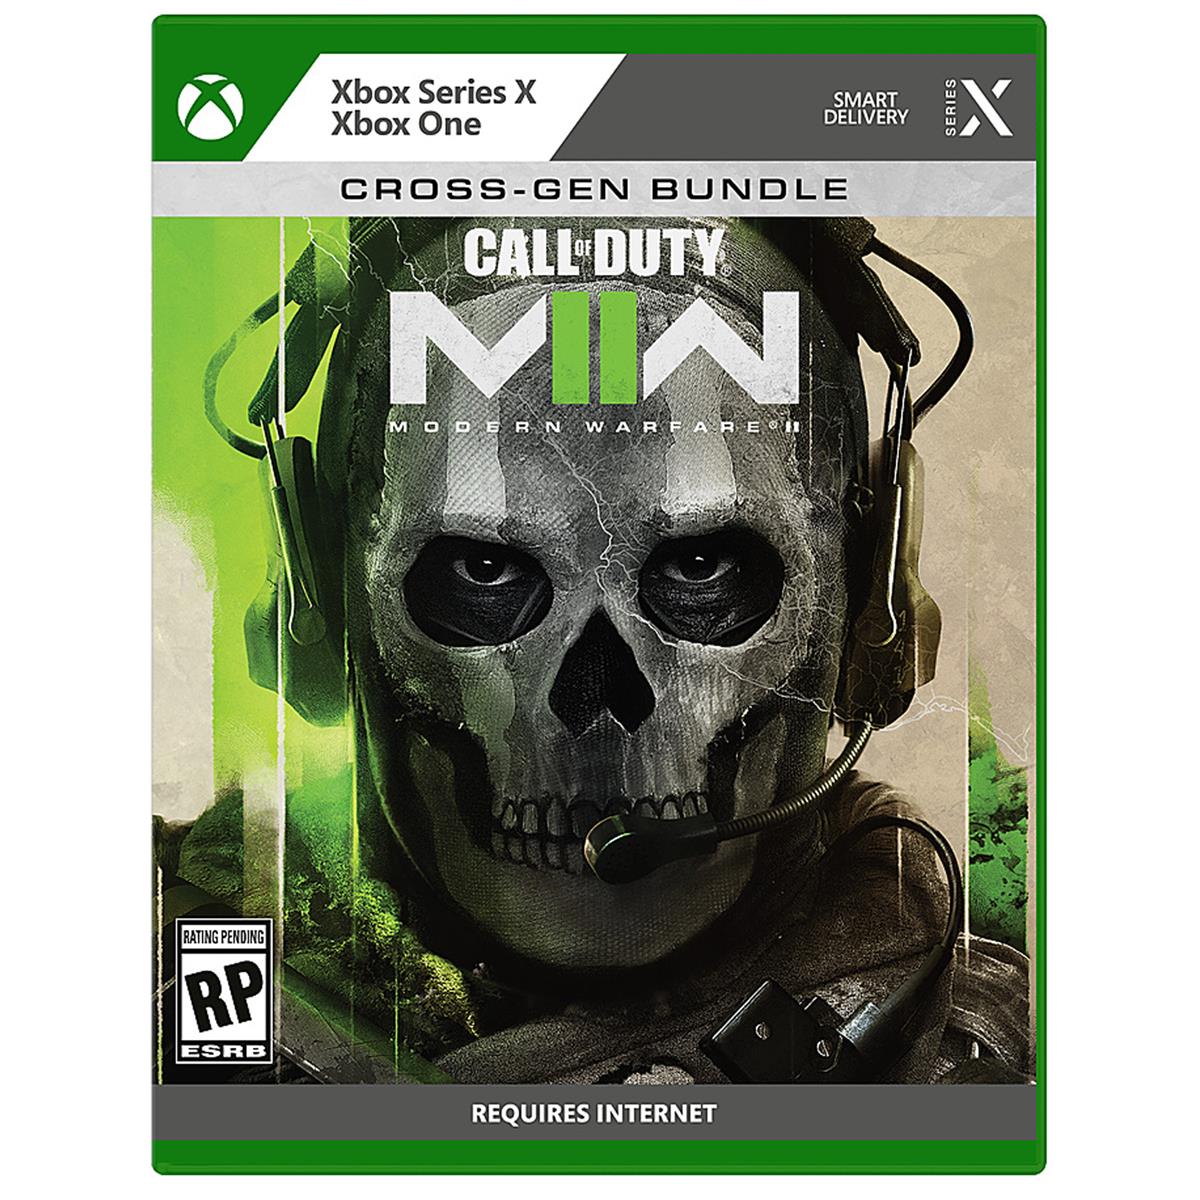 Photos - Computer Chair Activision Call of Duty: Modern Warfare II-Cross-Gen Bundle for Xbox One, 